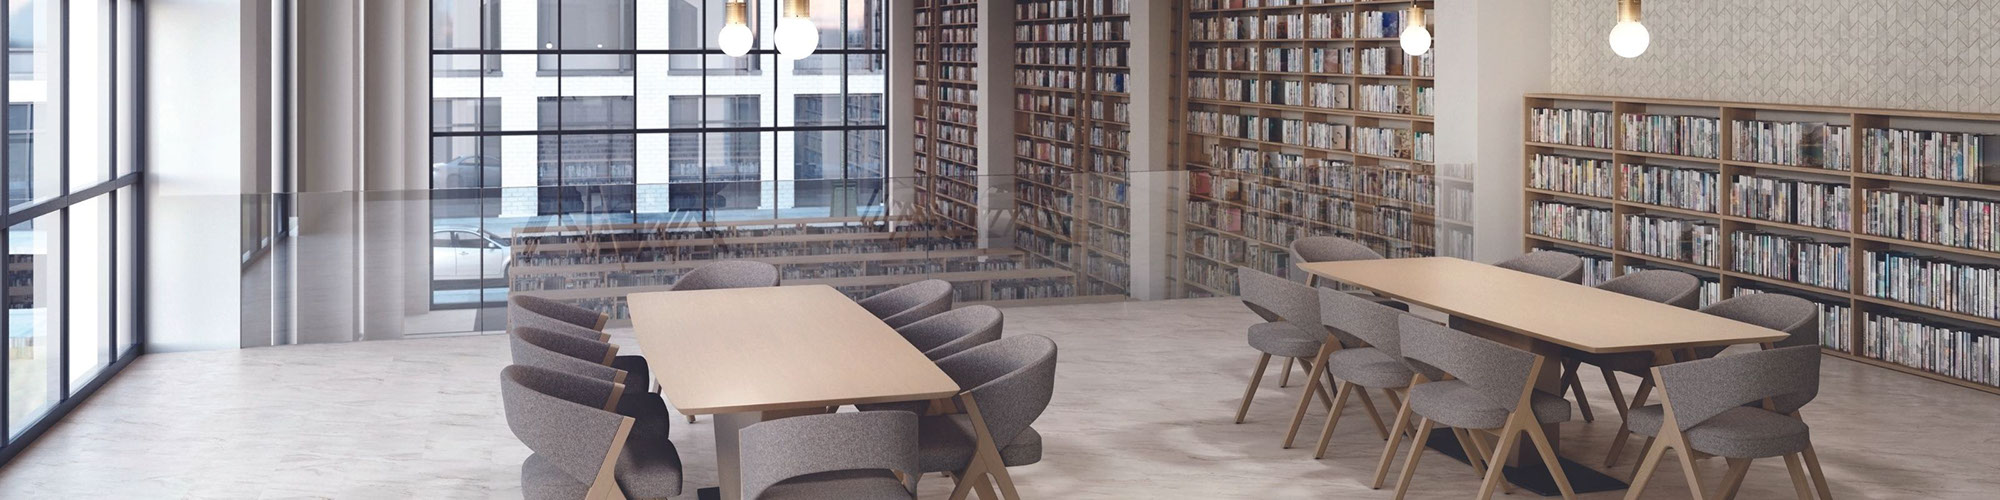 Public library with marble look tile floor, table & chairs, bookshelves, chevron wall tile, pendant lights, and floor-to-ceiling windows.